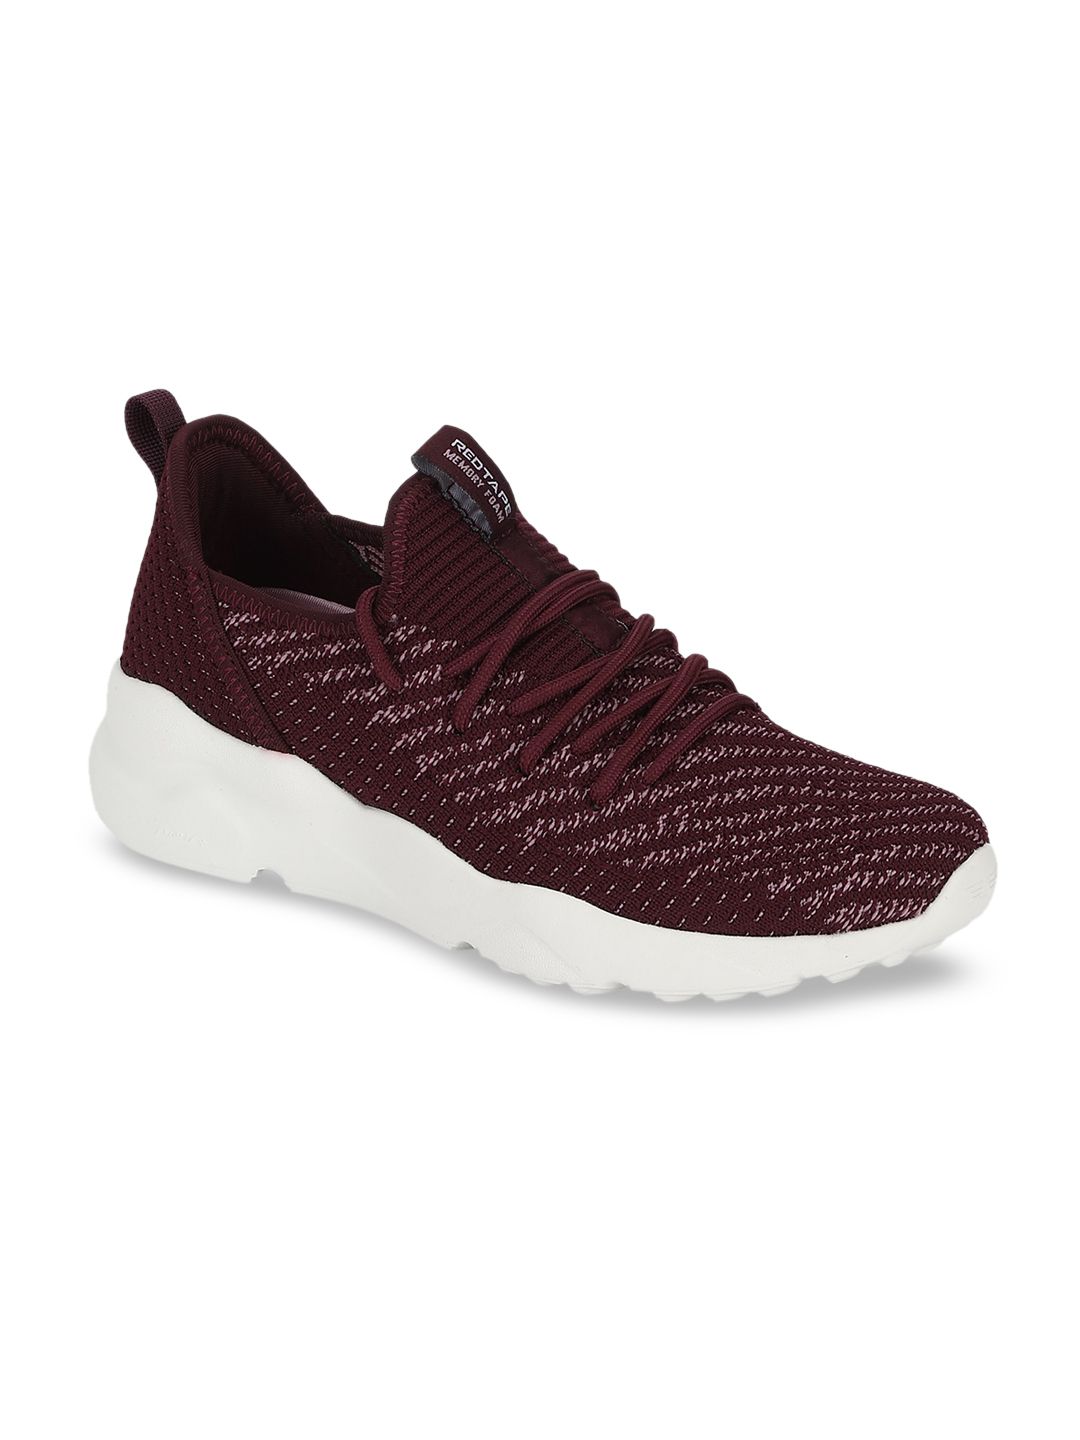 Red Tape Women Burgundy Textile Walking Shoes Price in India